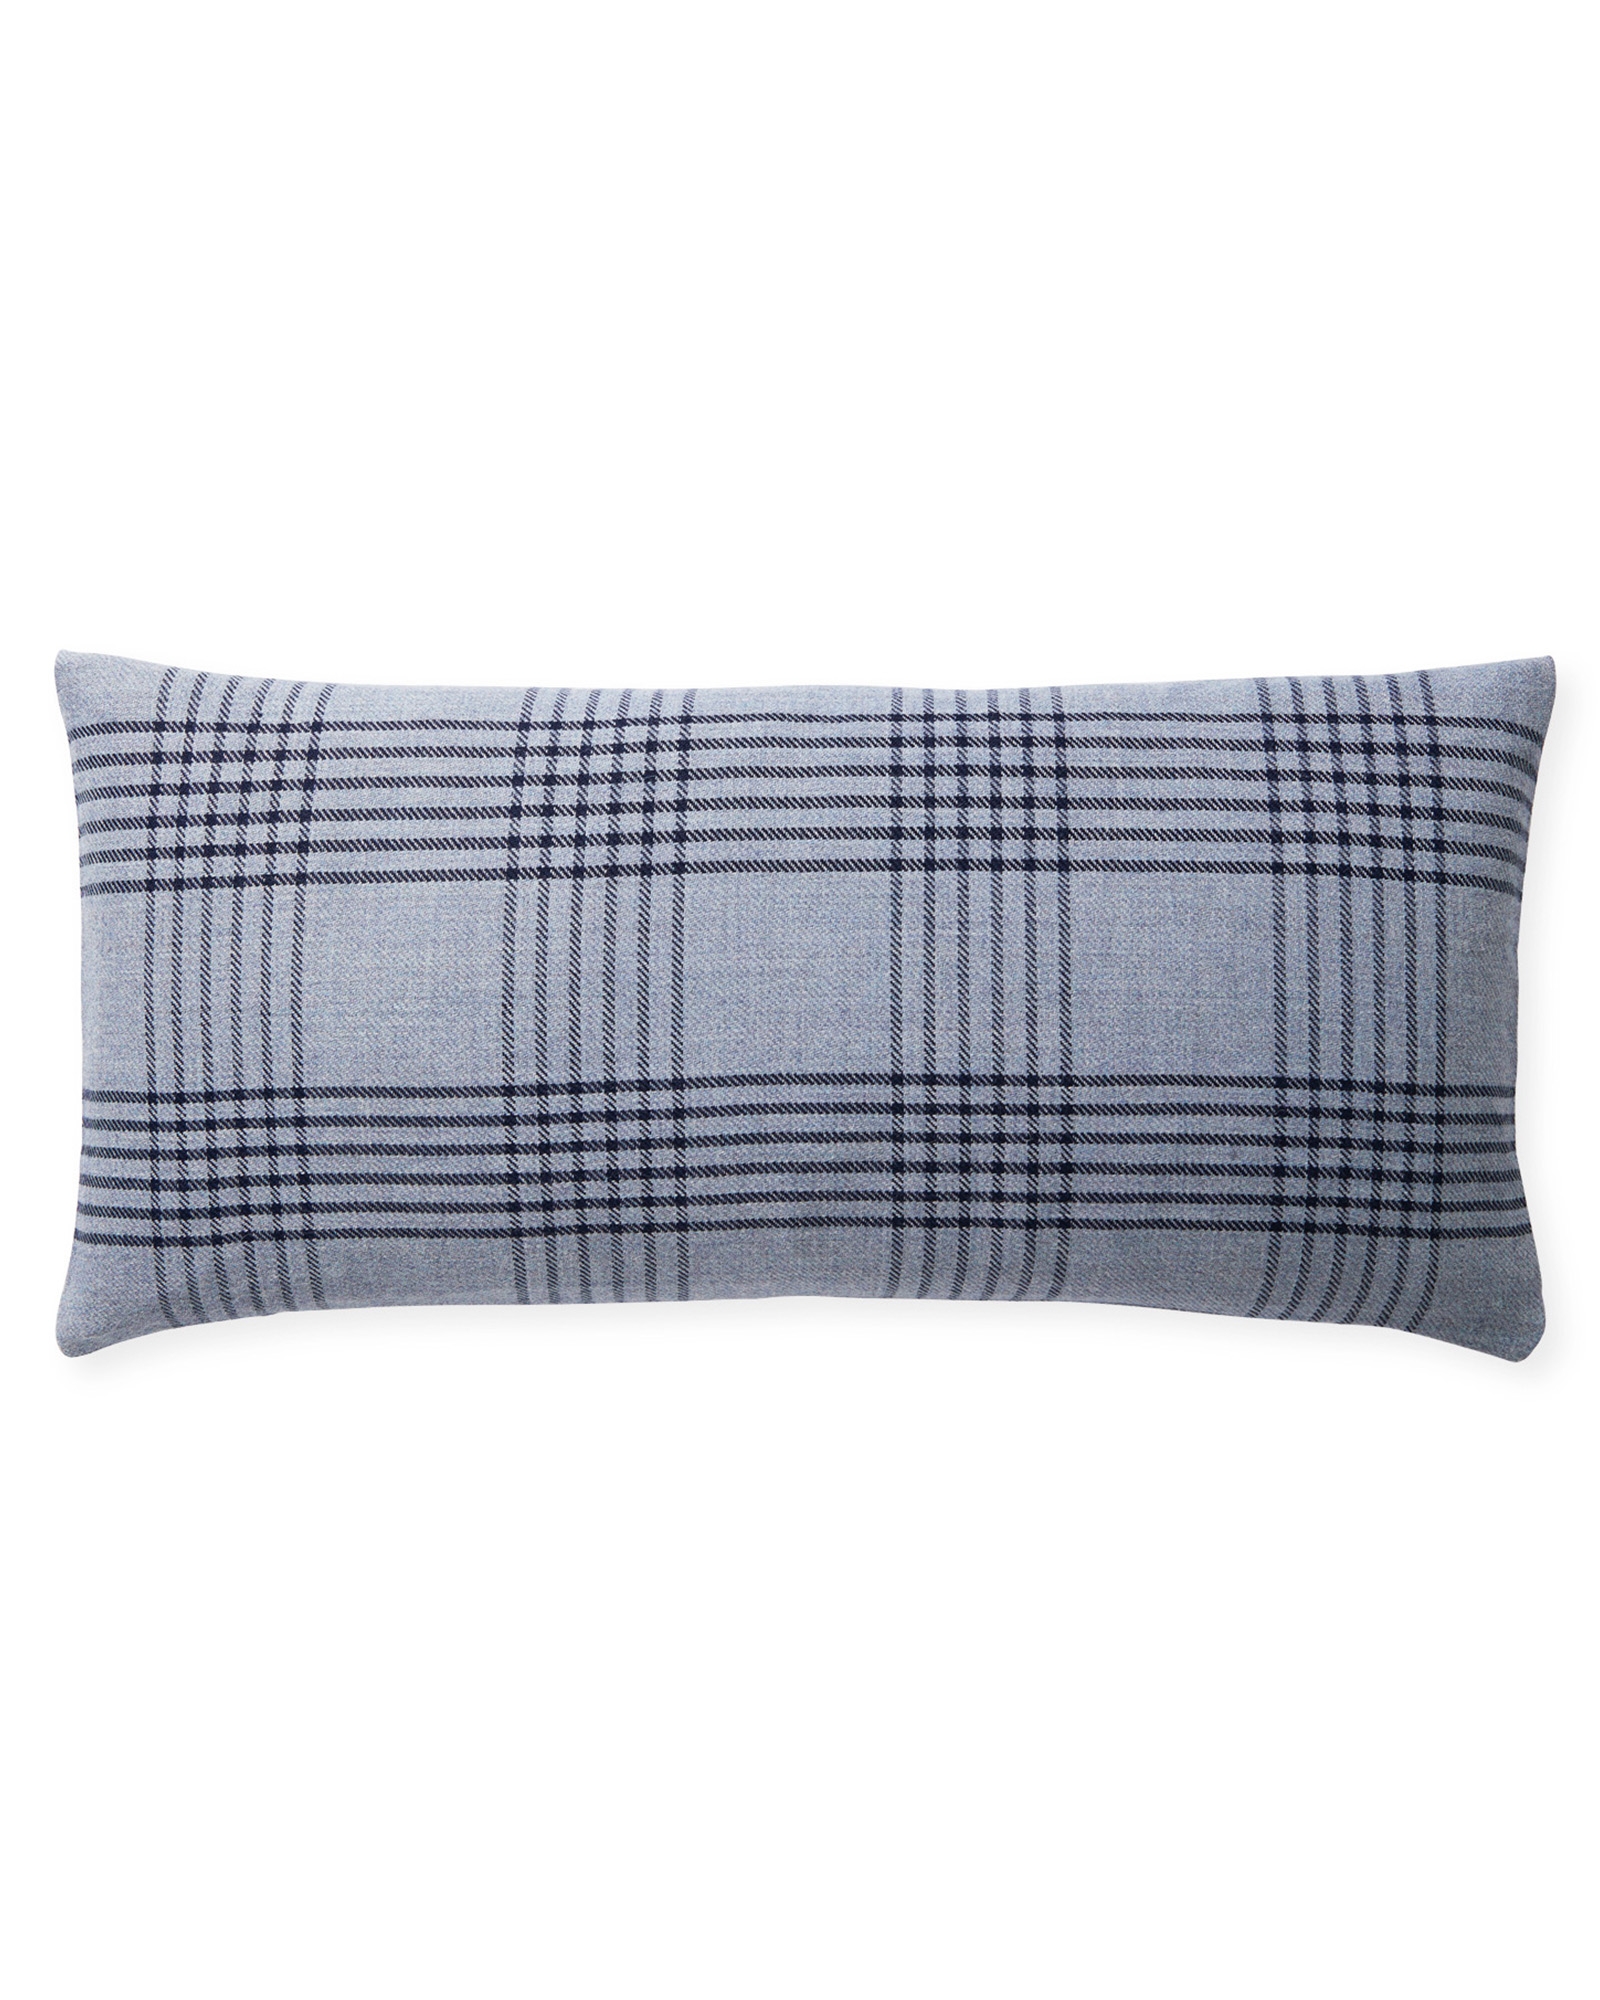 Blakely Plaid 14" x 30" Pillow Cover - Chambray - Insert sold separately - Image 0